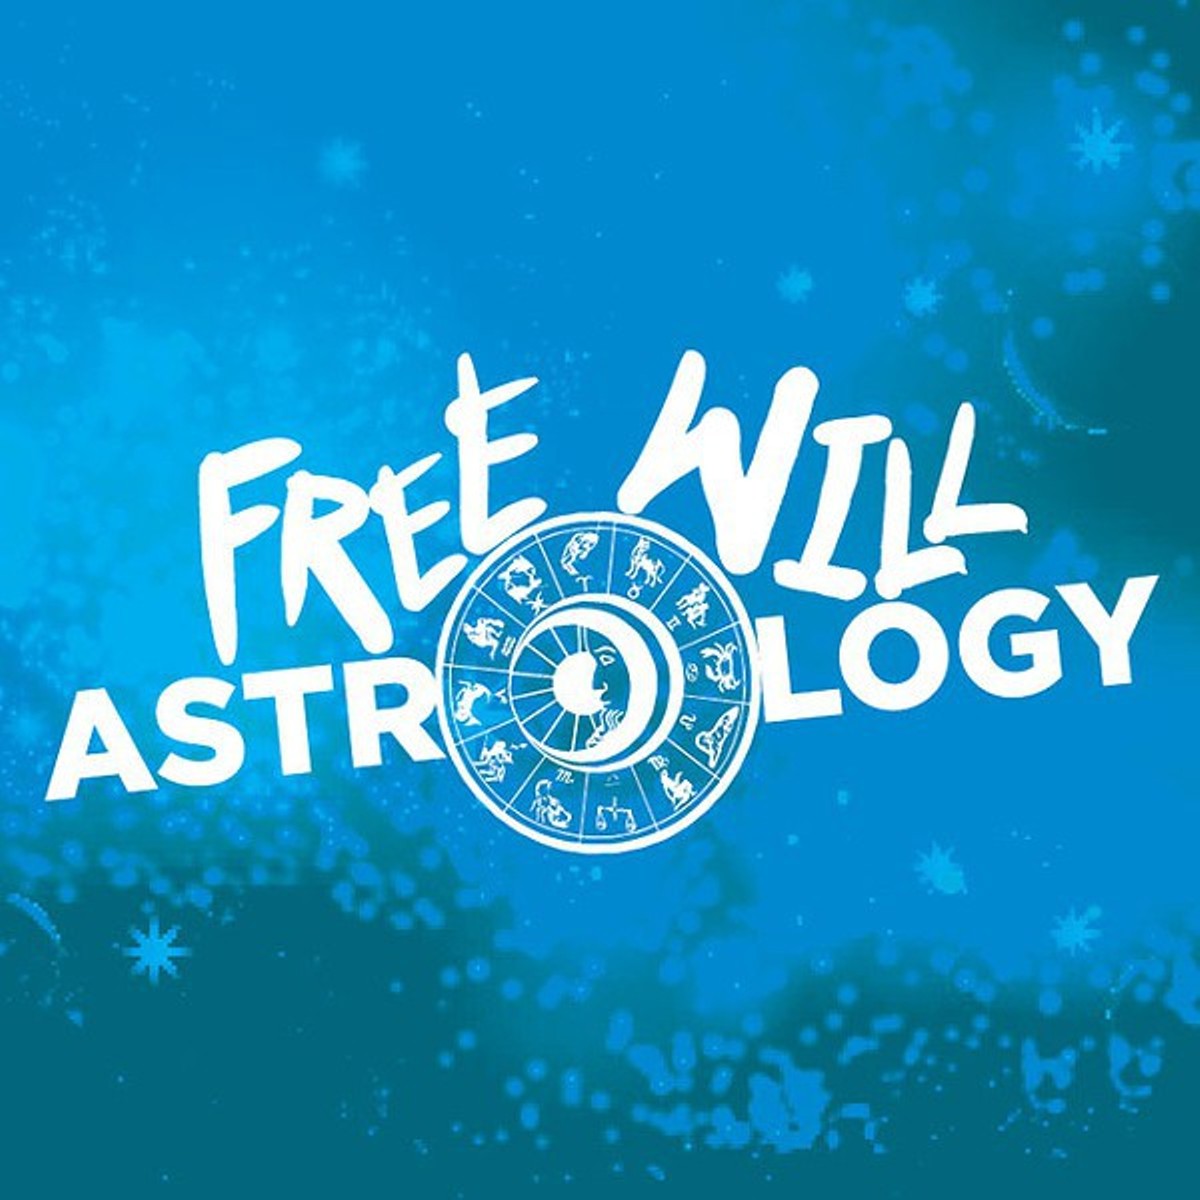 Free Will Astrology (12/9/15)